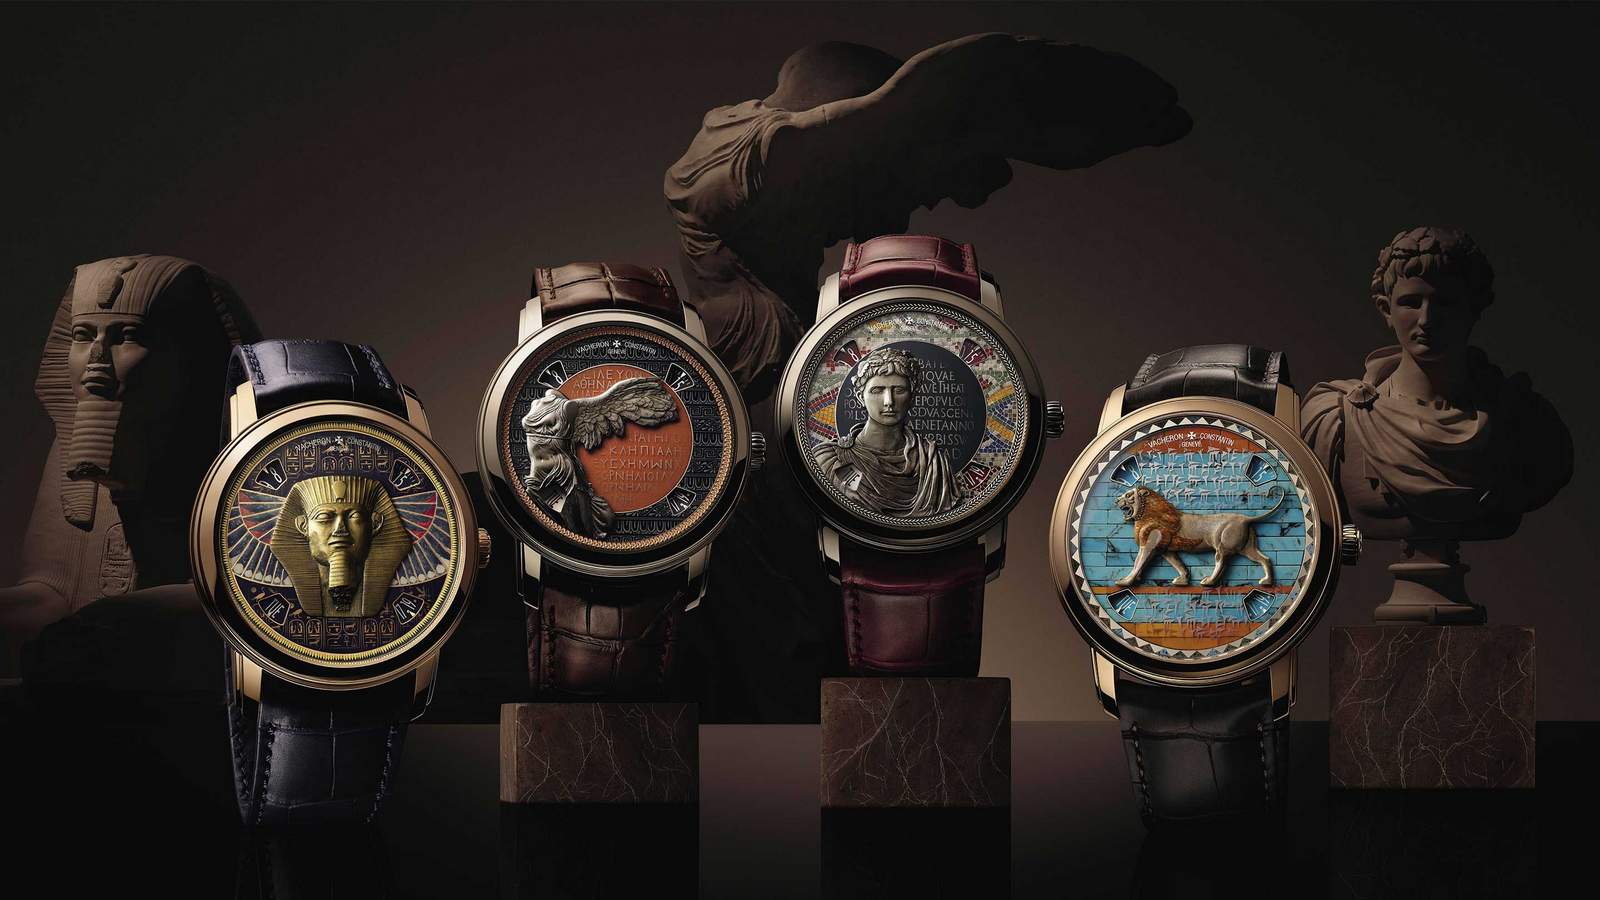 Vacheron Constantin has partnered with the Louvre for an artistic collection of timepieces